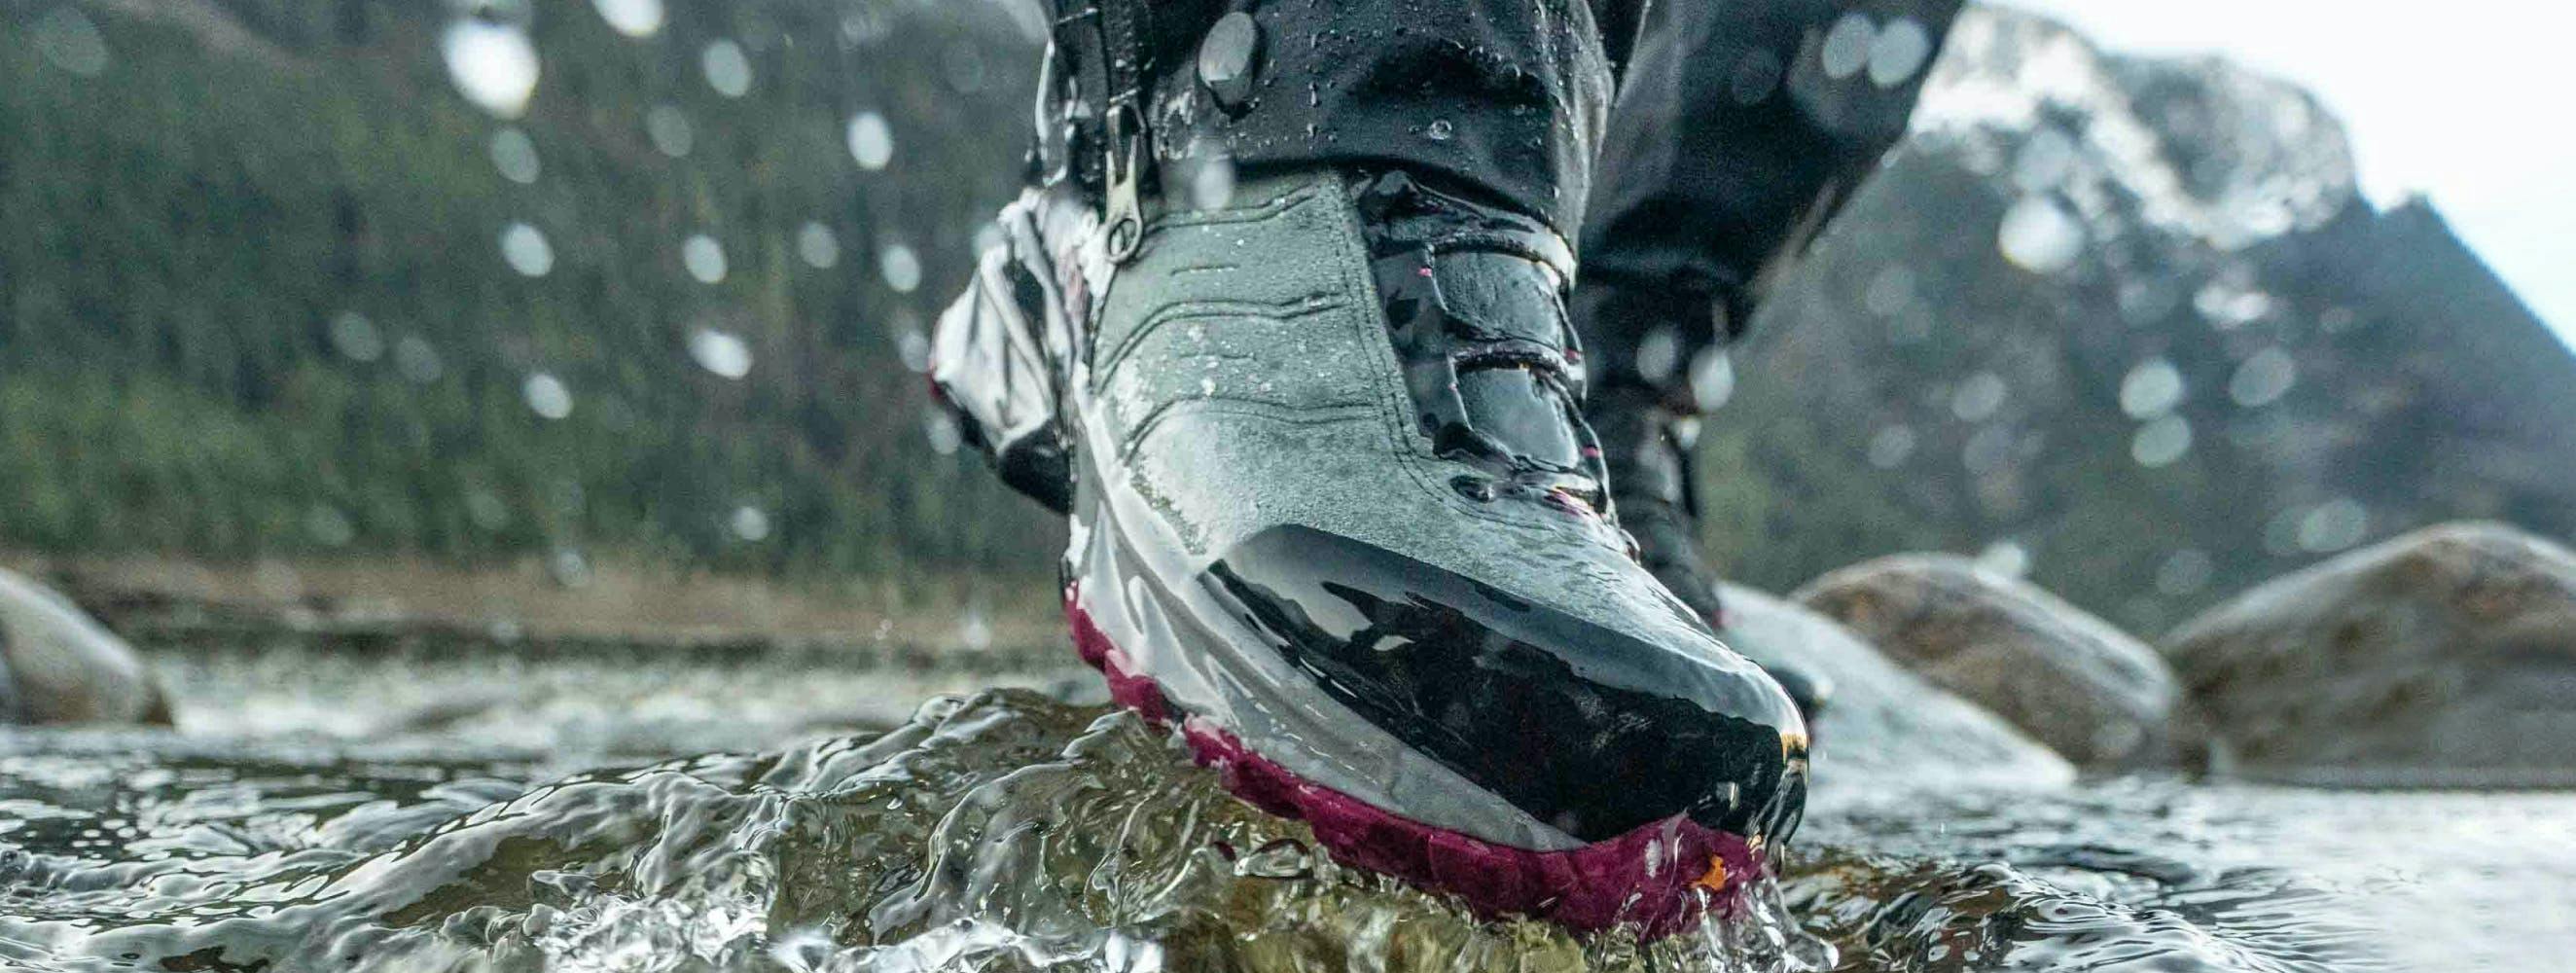 Stay dry on trail. Waterproof hiking boots and trail runners for off-season soggy sections.. Shop waterproof treads